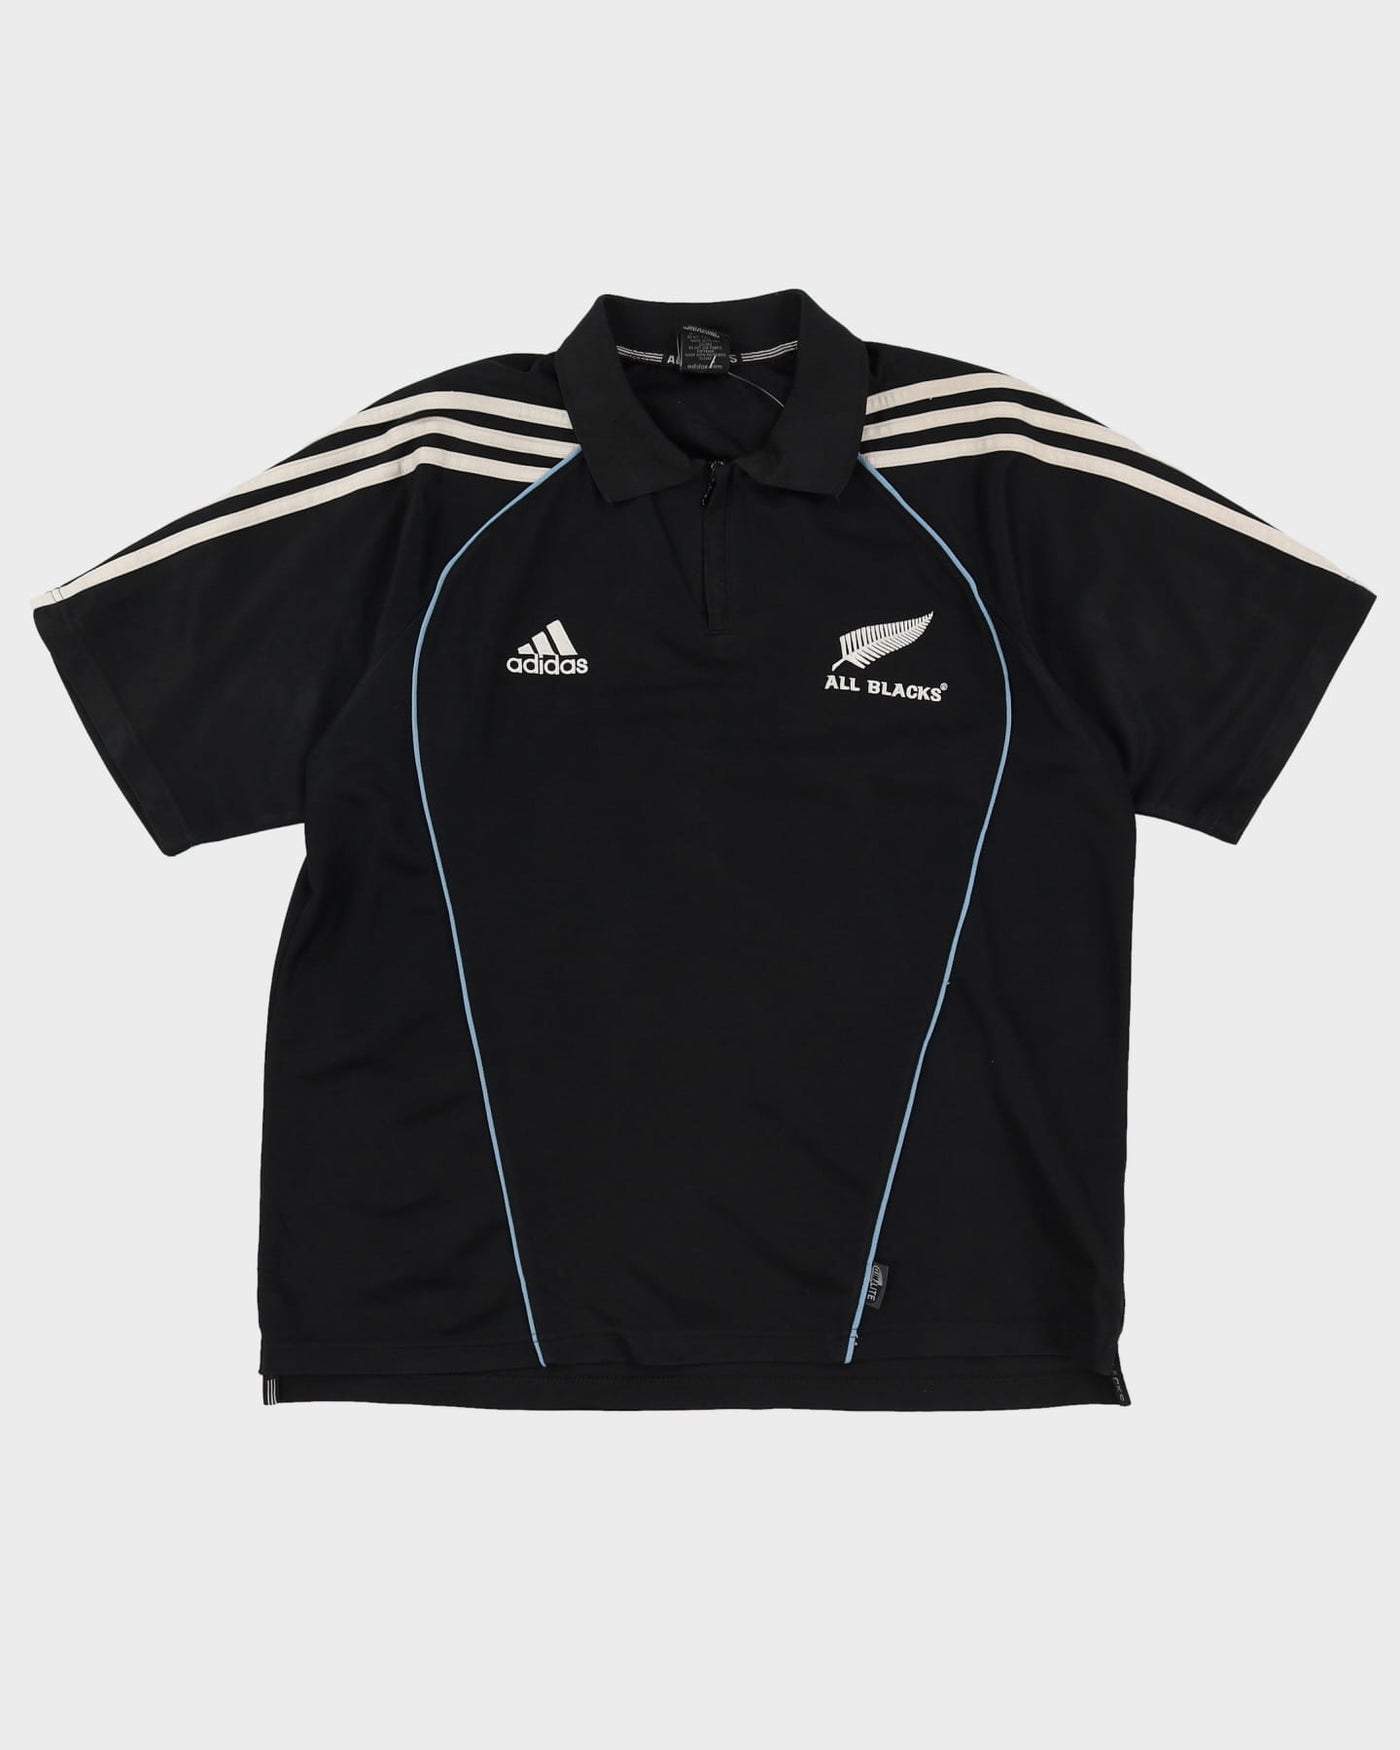 Adidas 00s Rugby New Zealand All Blacks Black Rugby Shirt / Jersey - XL